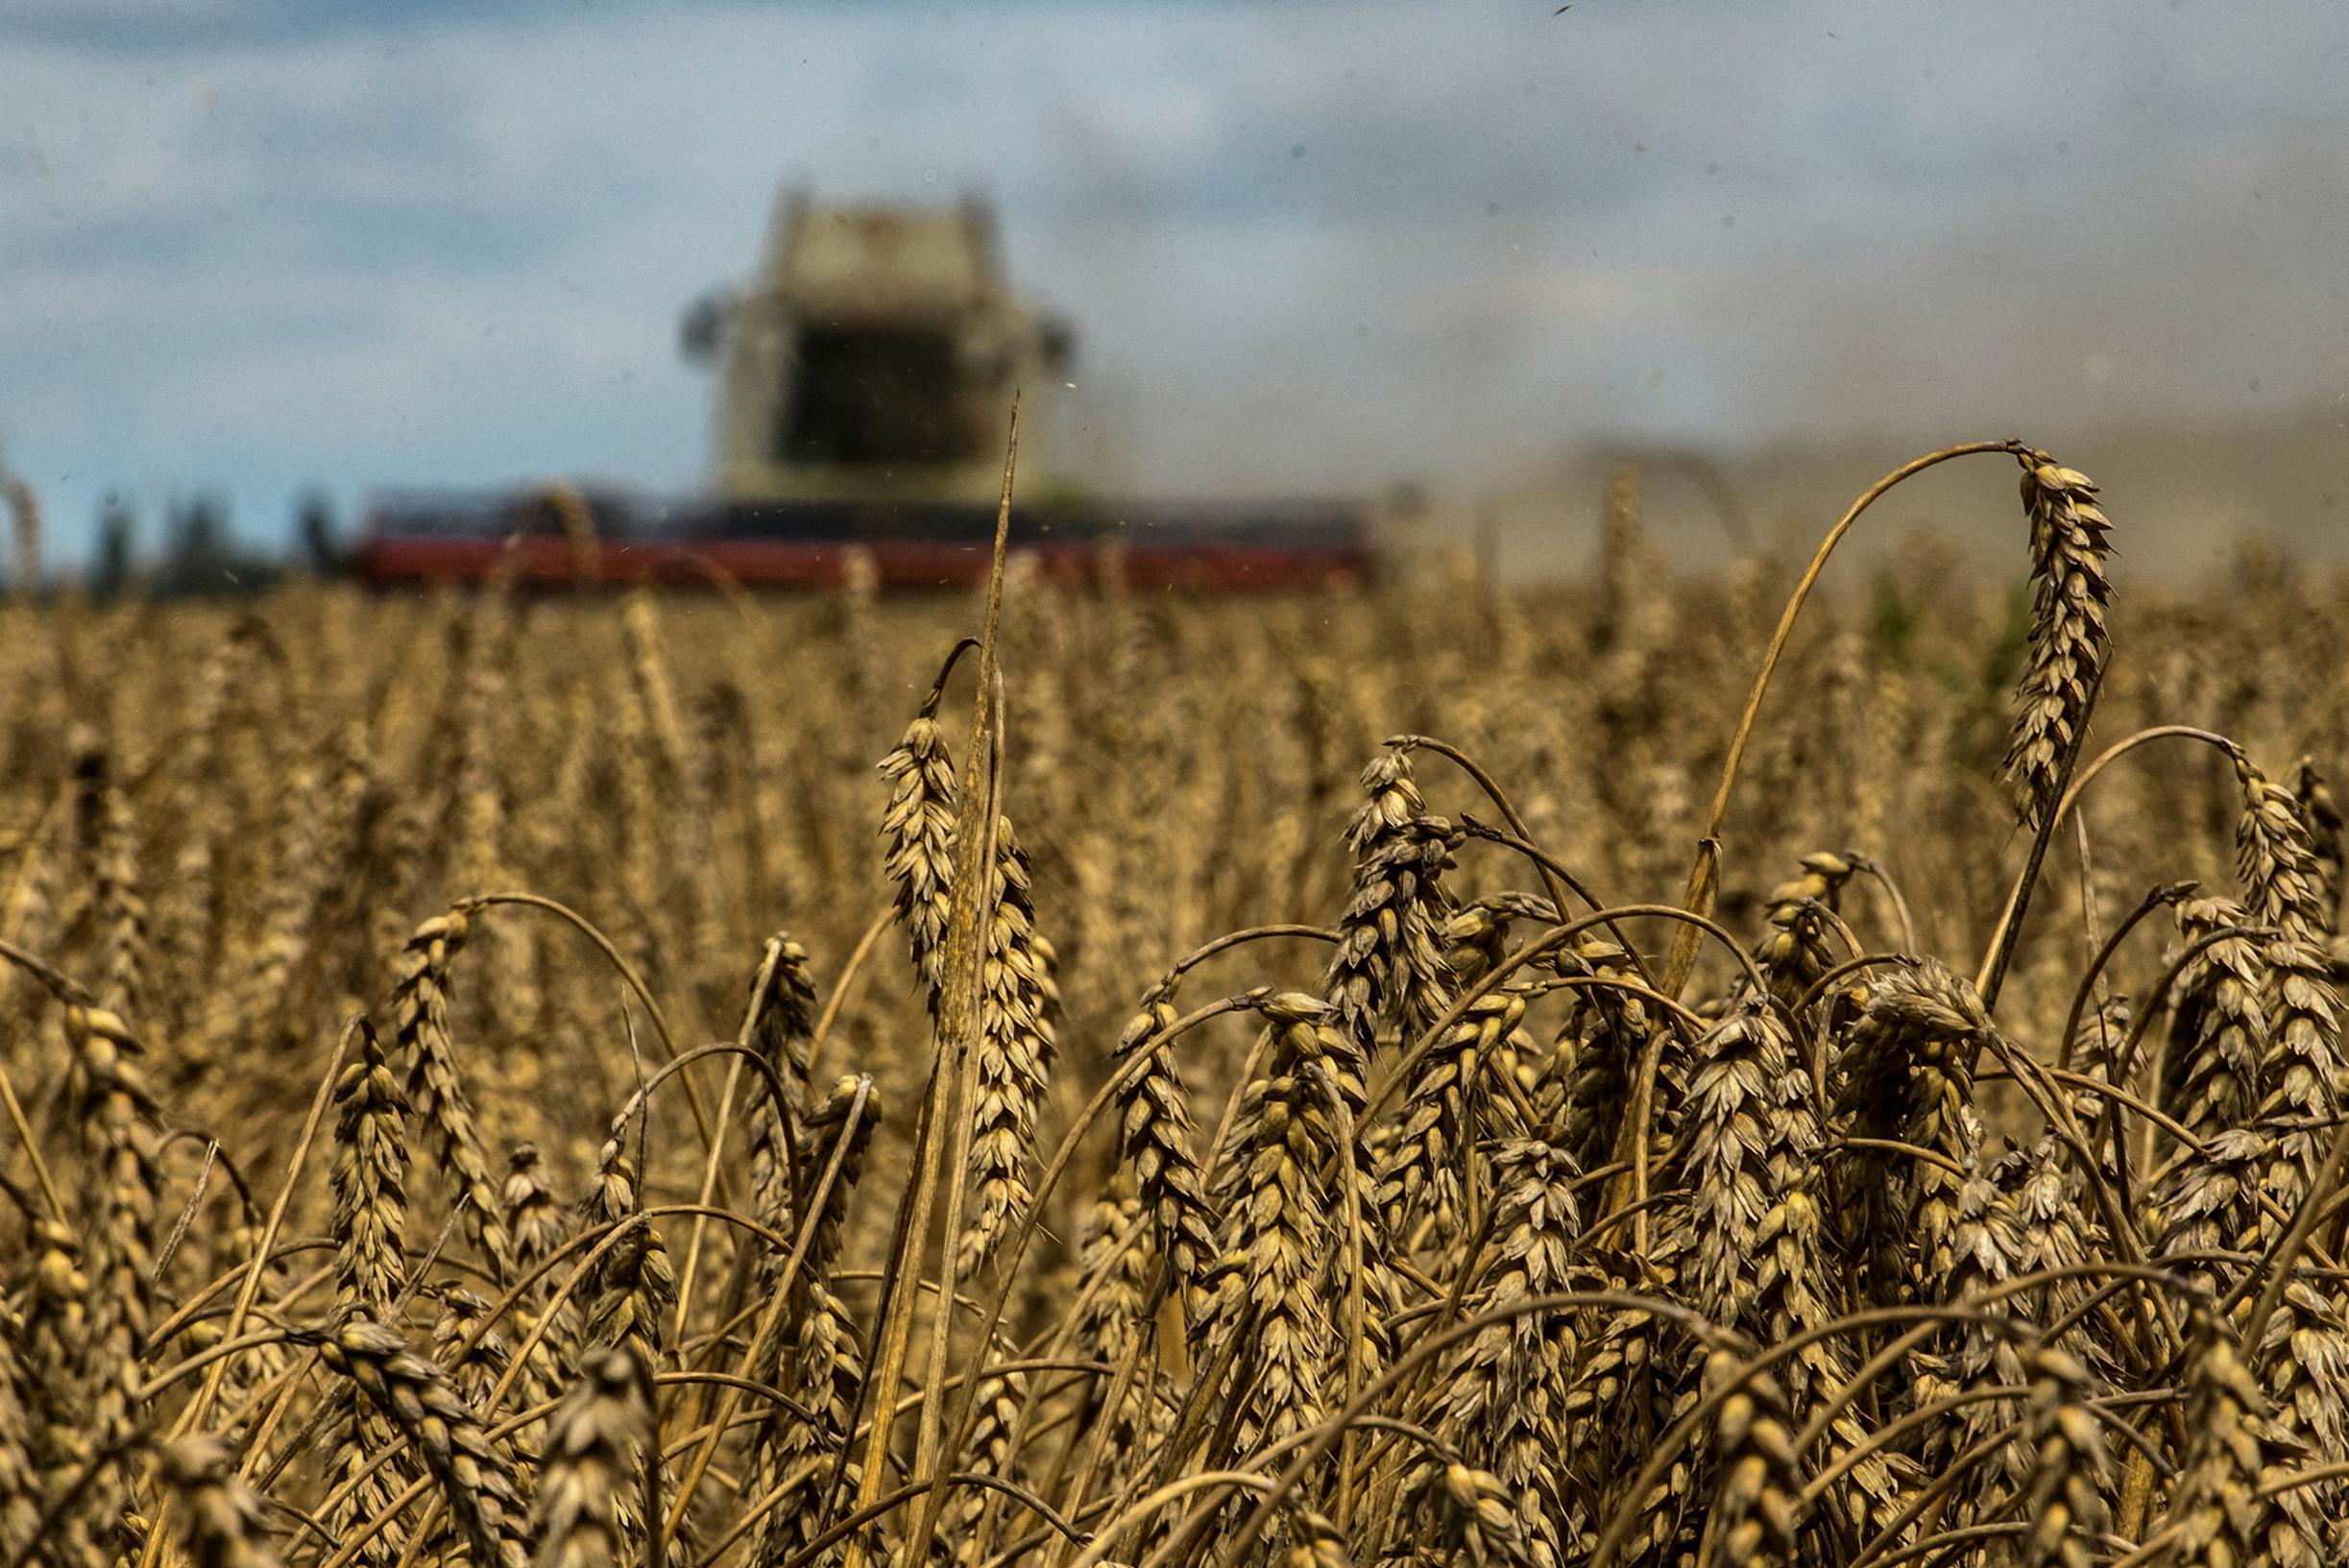 Grain prices fall due to exports from Ukraine, but “situation not yet normalized”